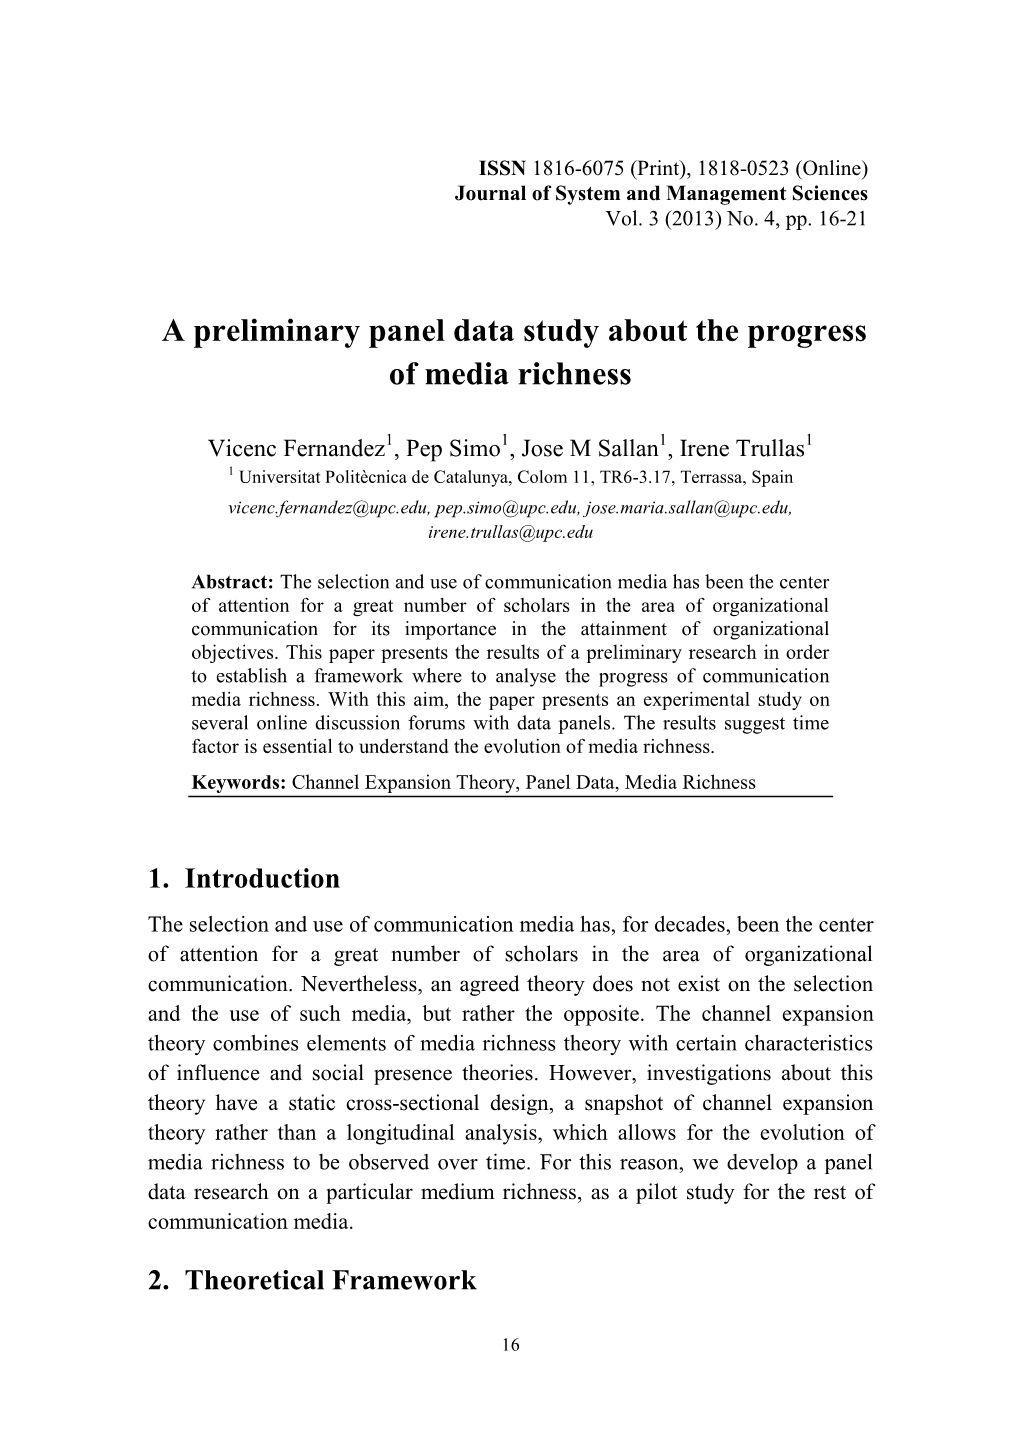 A Preliminary Panel Data Study About the Progress of Media Richness